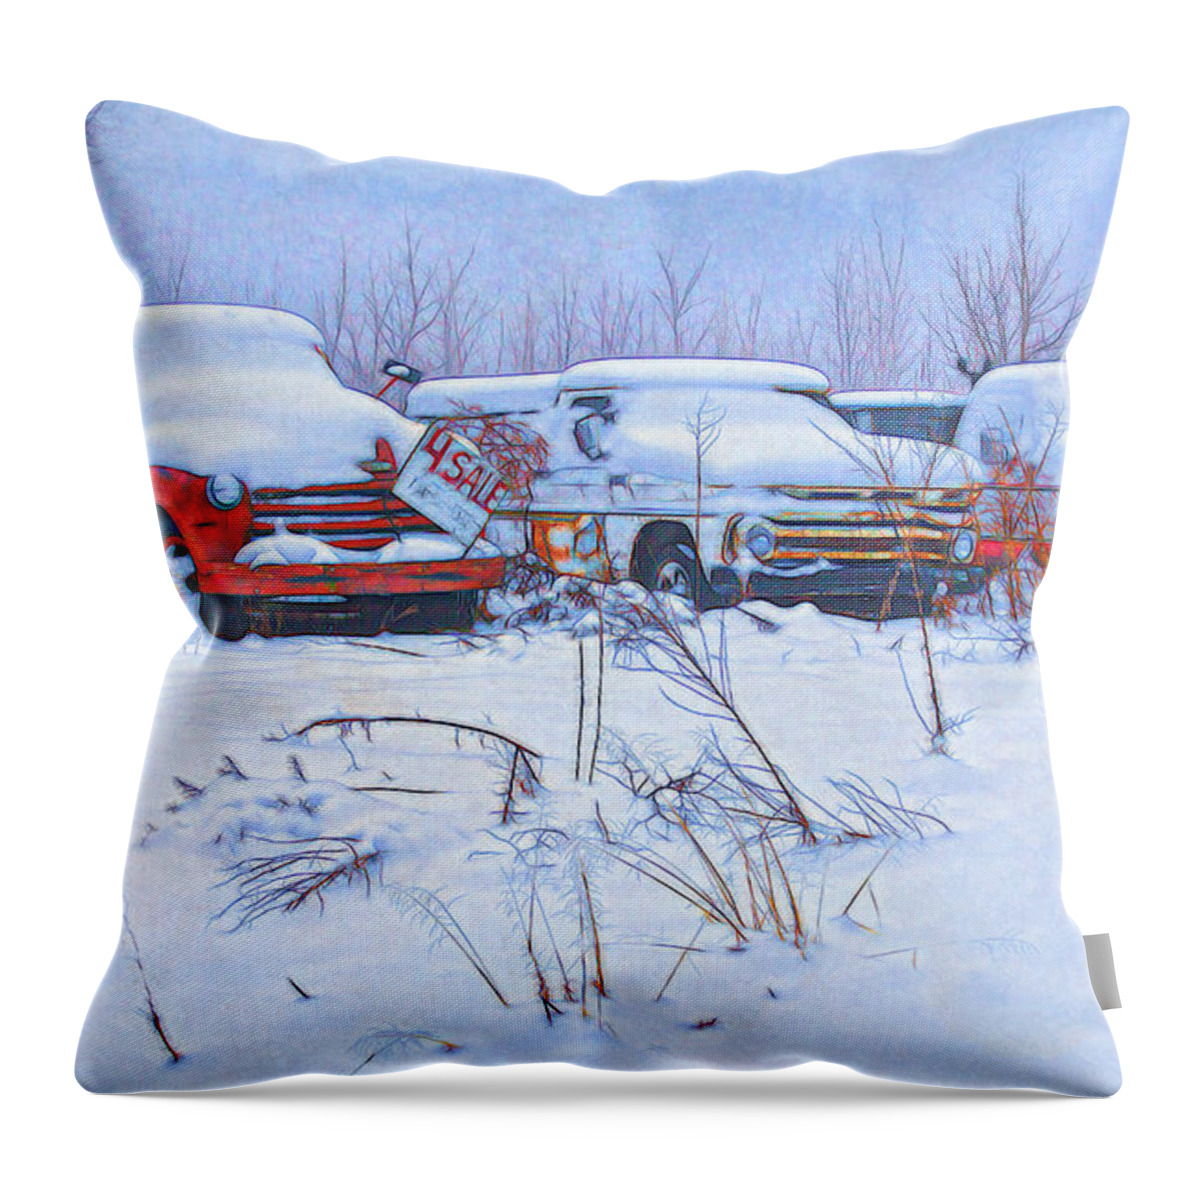 Truck Throw Pillow featuring the photograph Old Trucks in Snow by Anna Louise